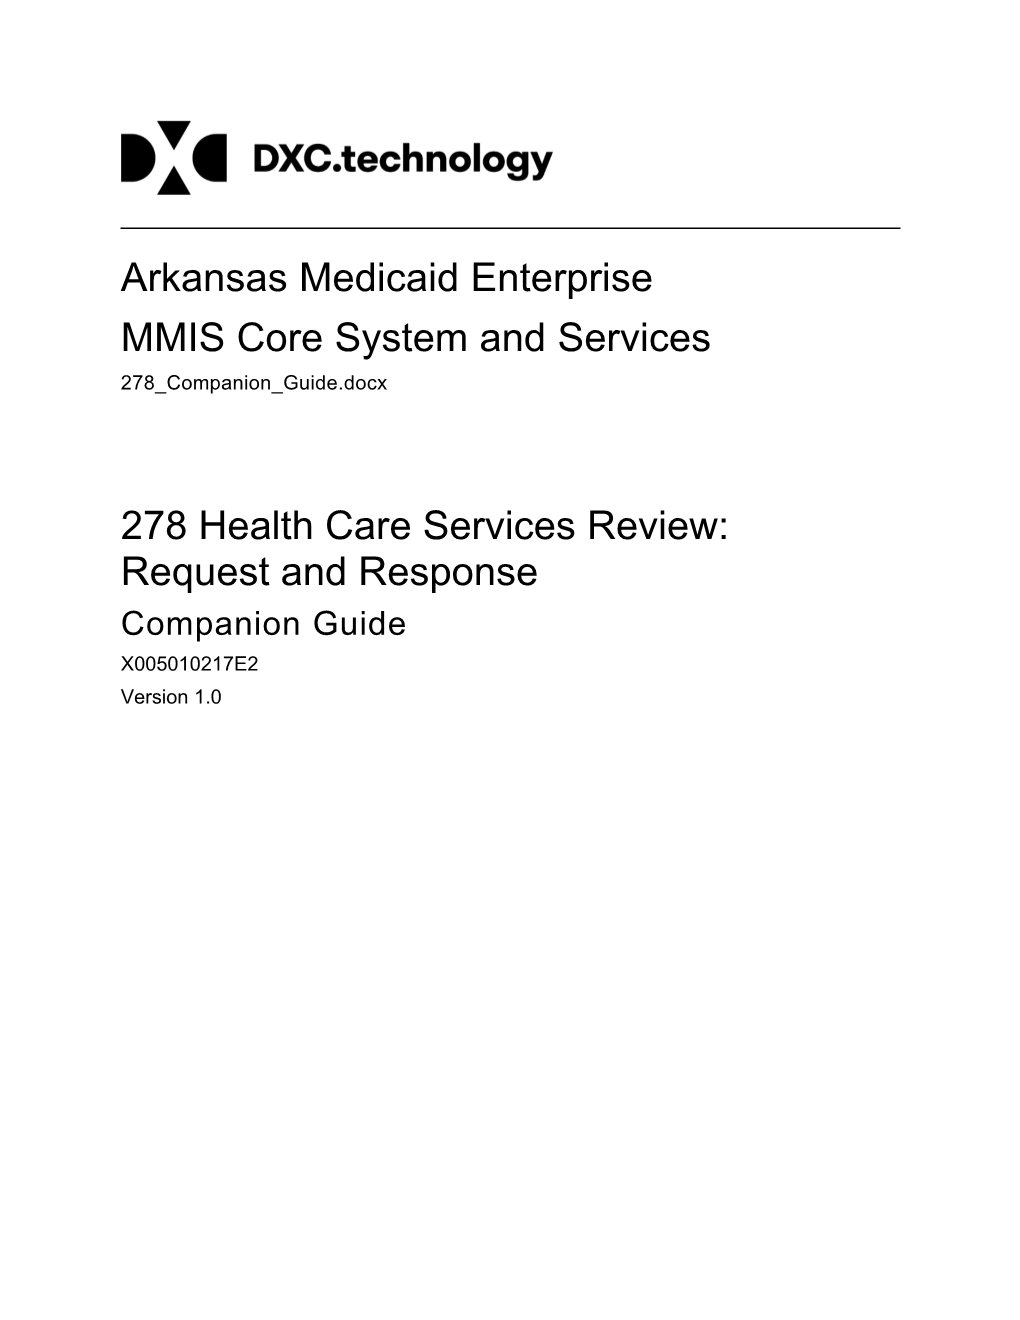 MMIS Core System and Services